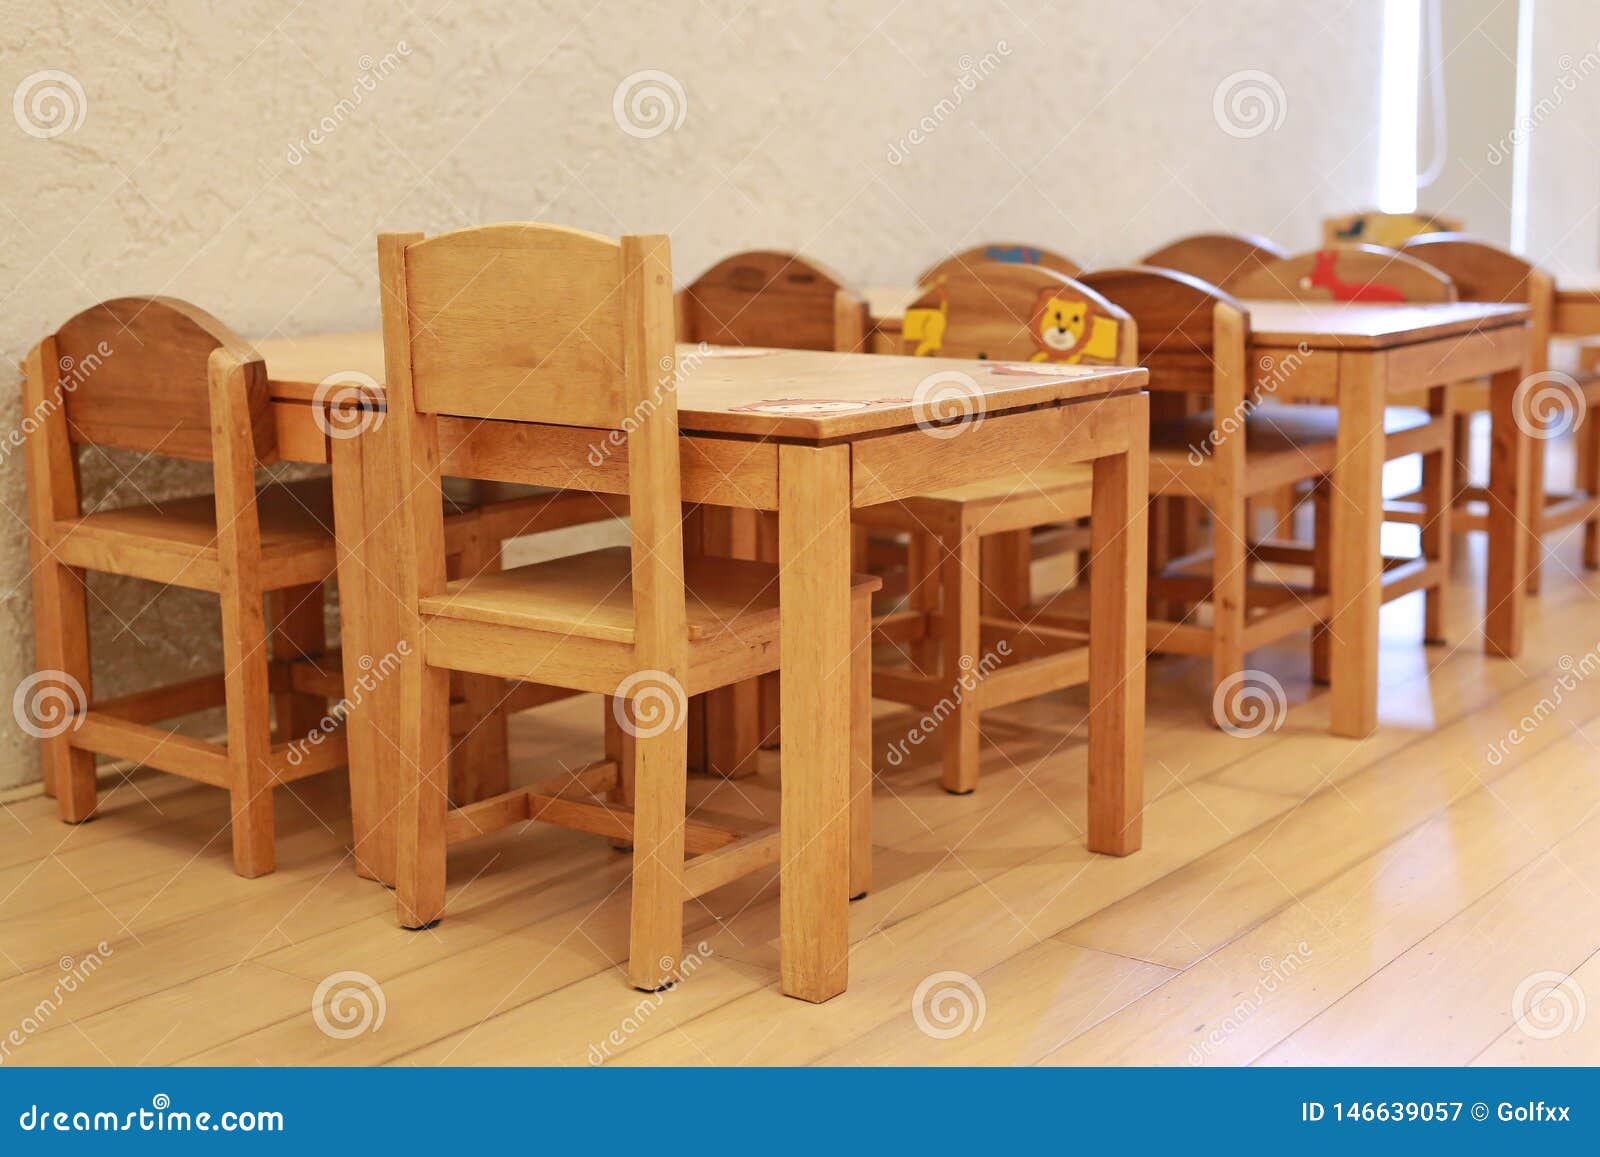 Small Desk And Chairs For Kid In Student Classroom Stock Image